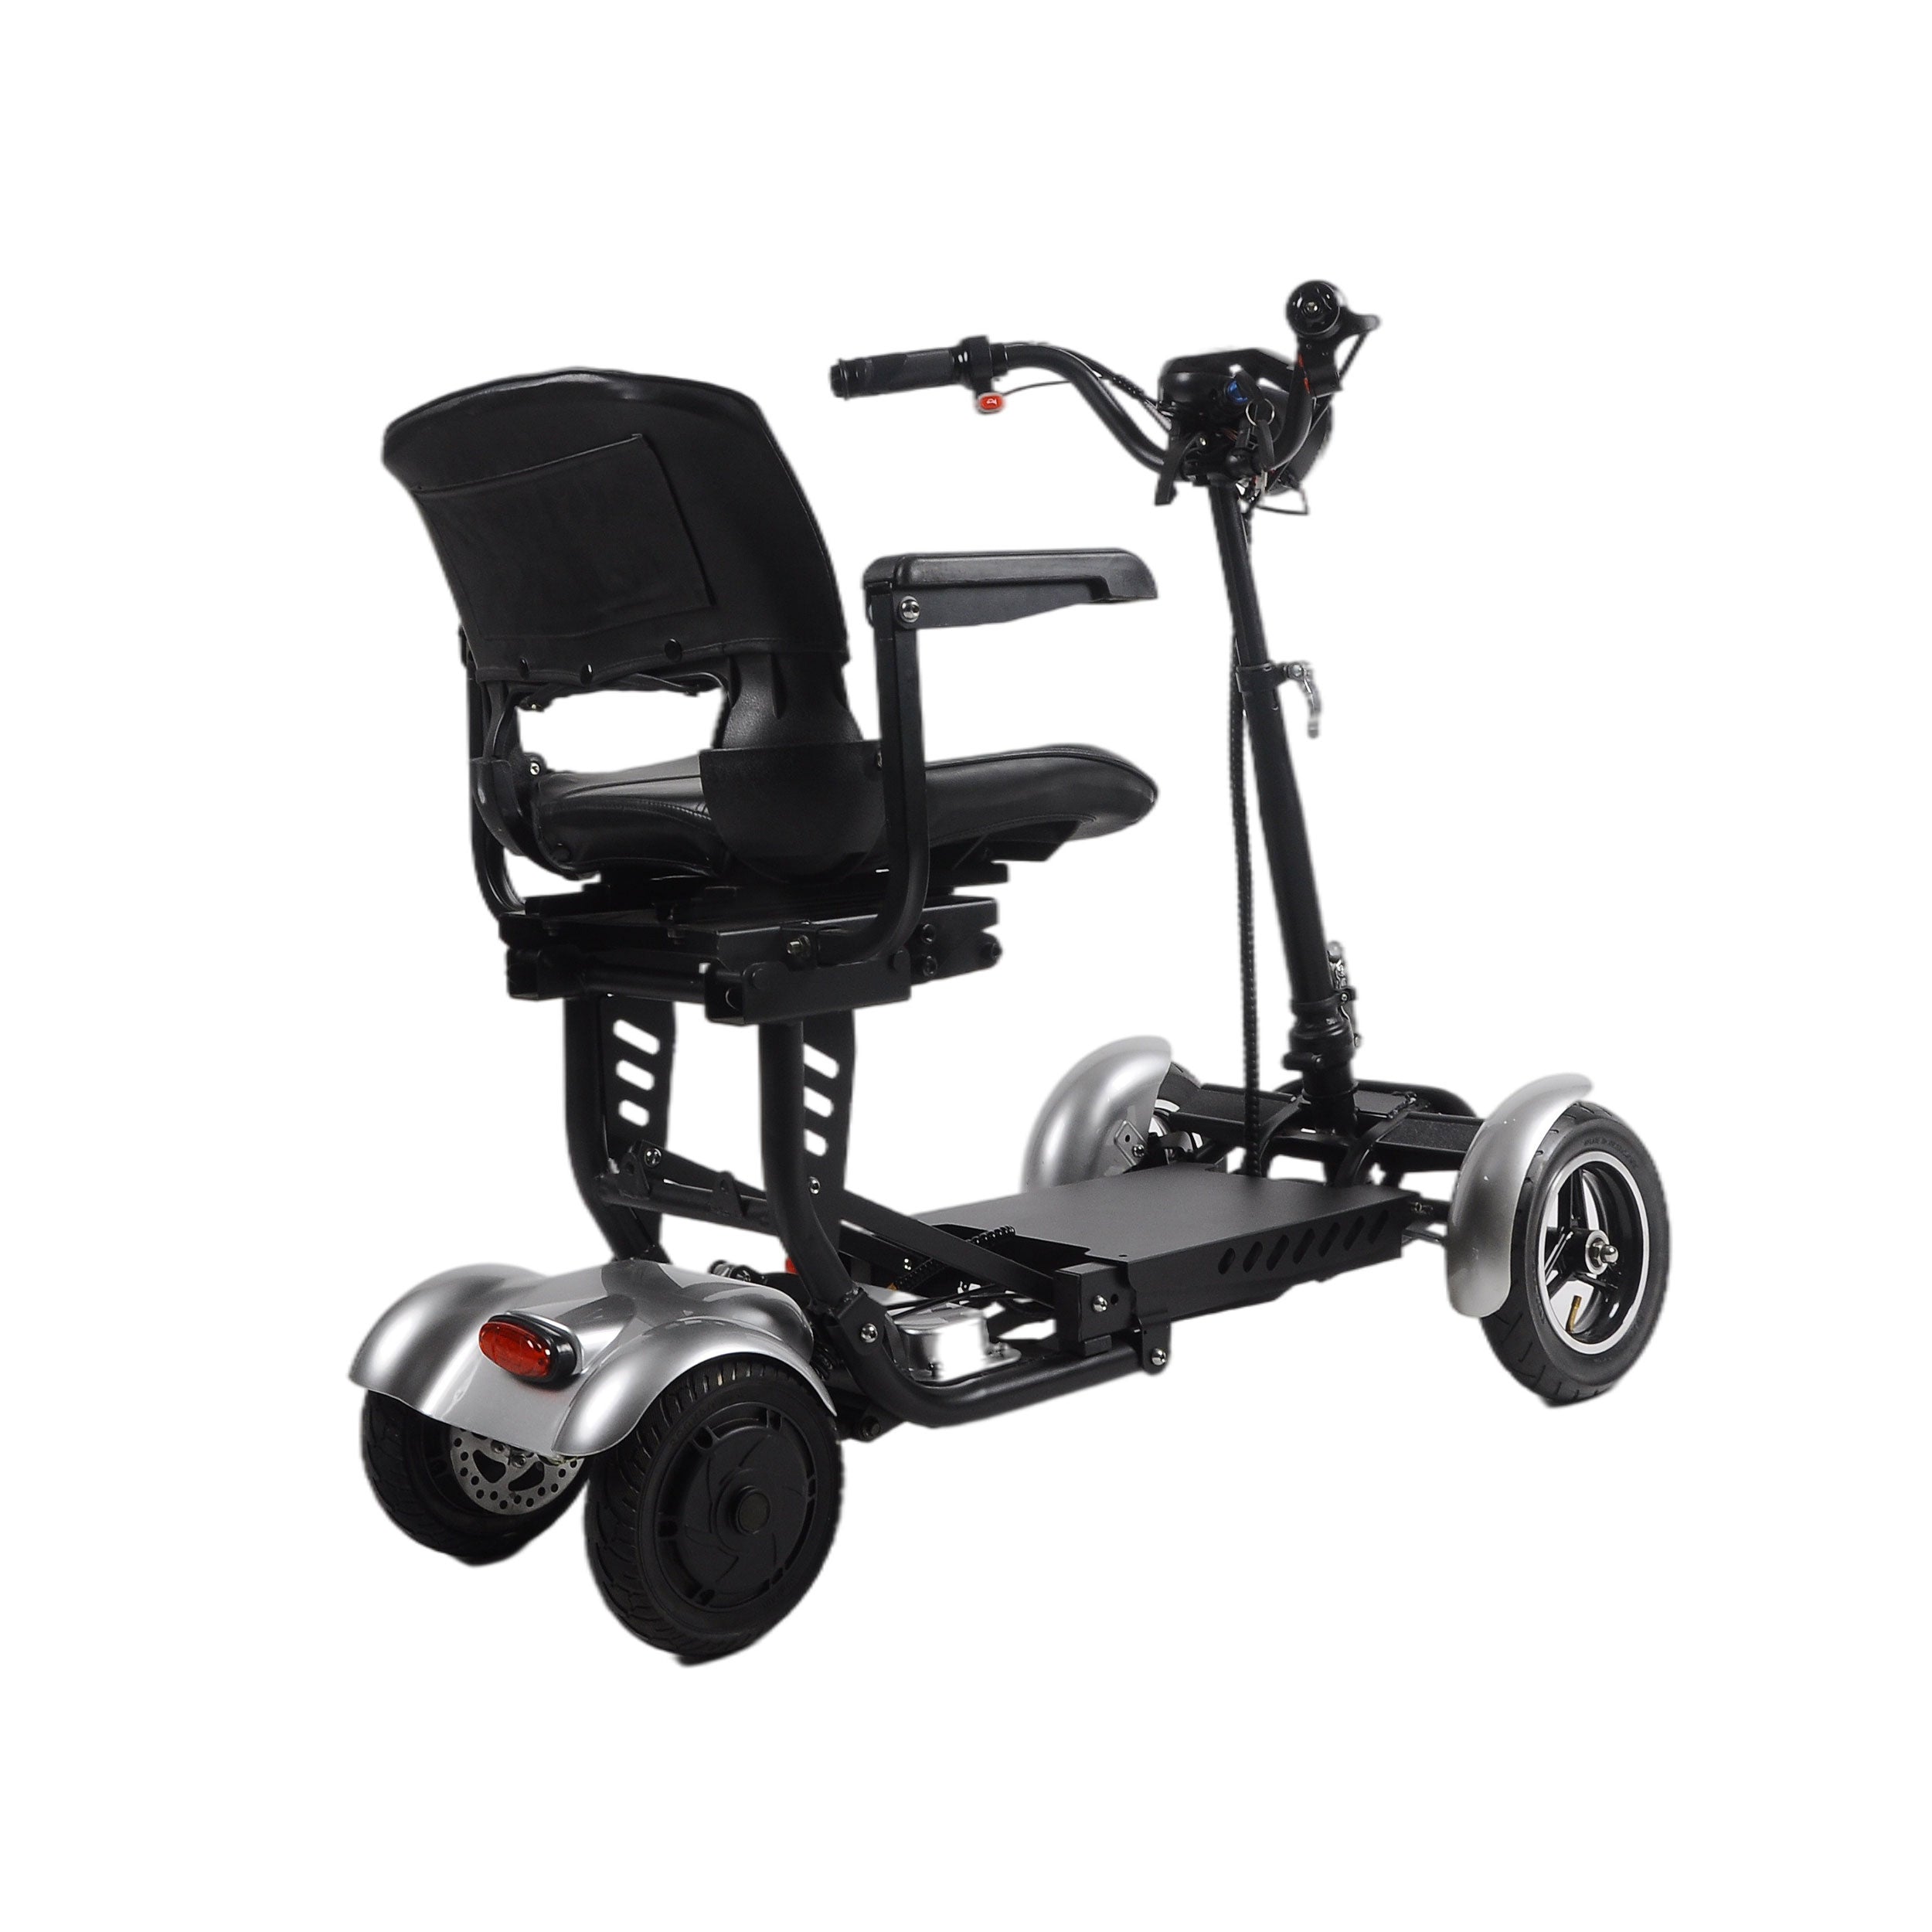 Rubicon FX Mobility Scooter